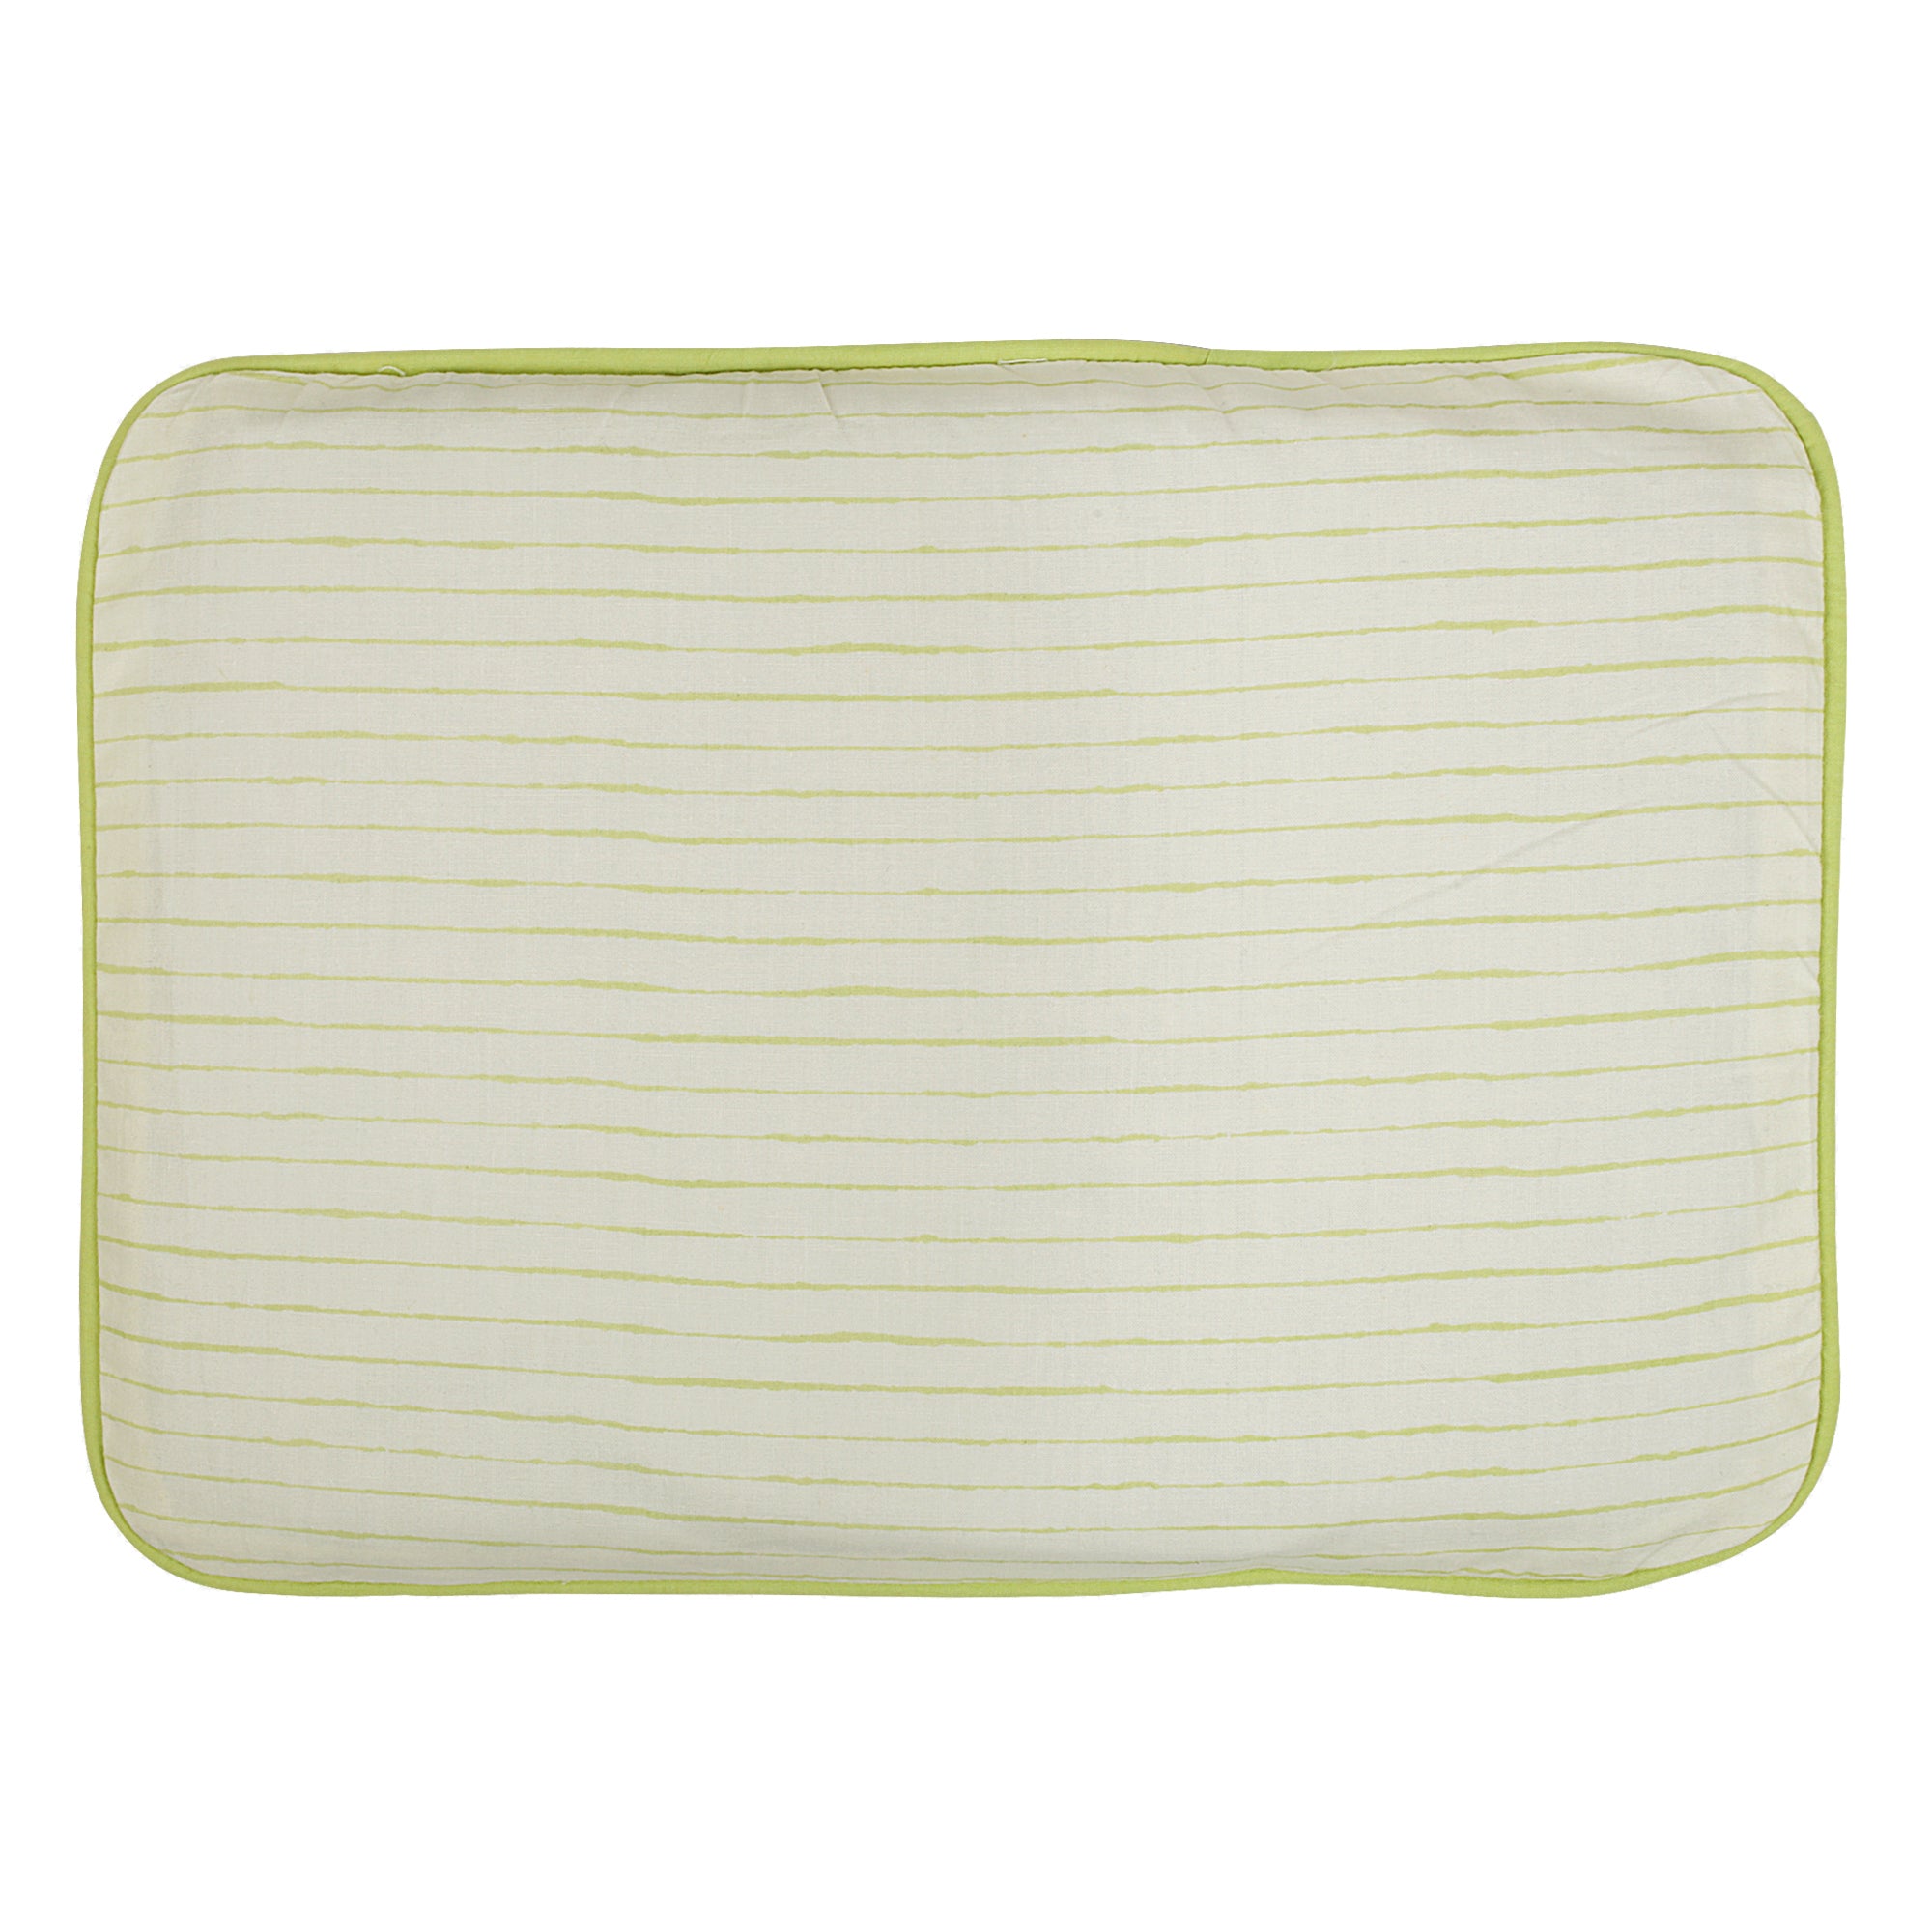 SHADOW LIME LINE MUSTARD PILLOW COVER AND FILLER SET